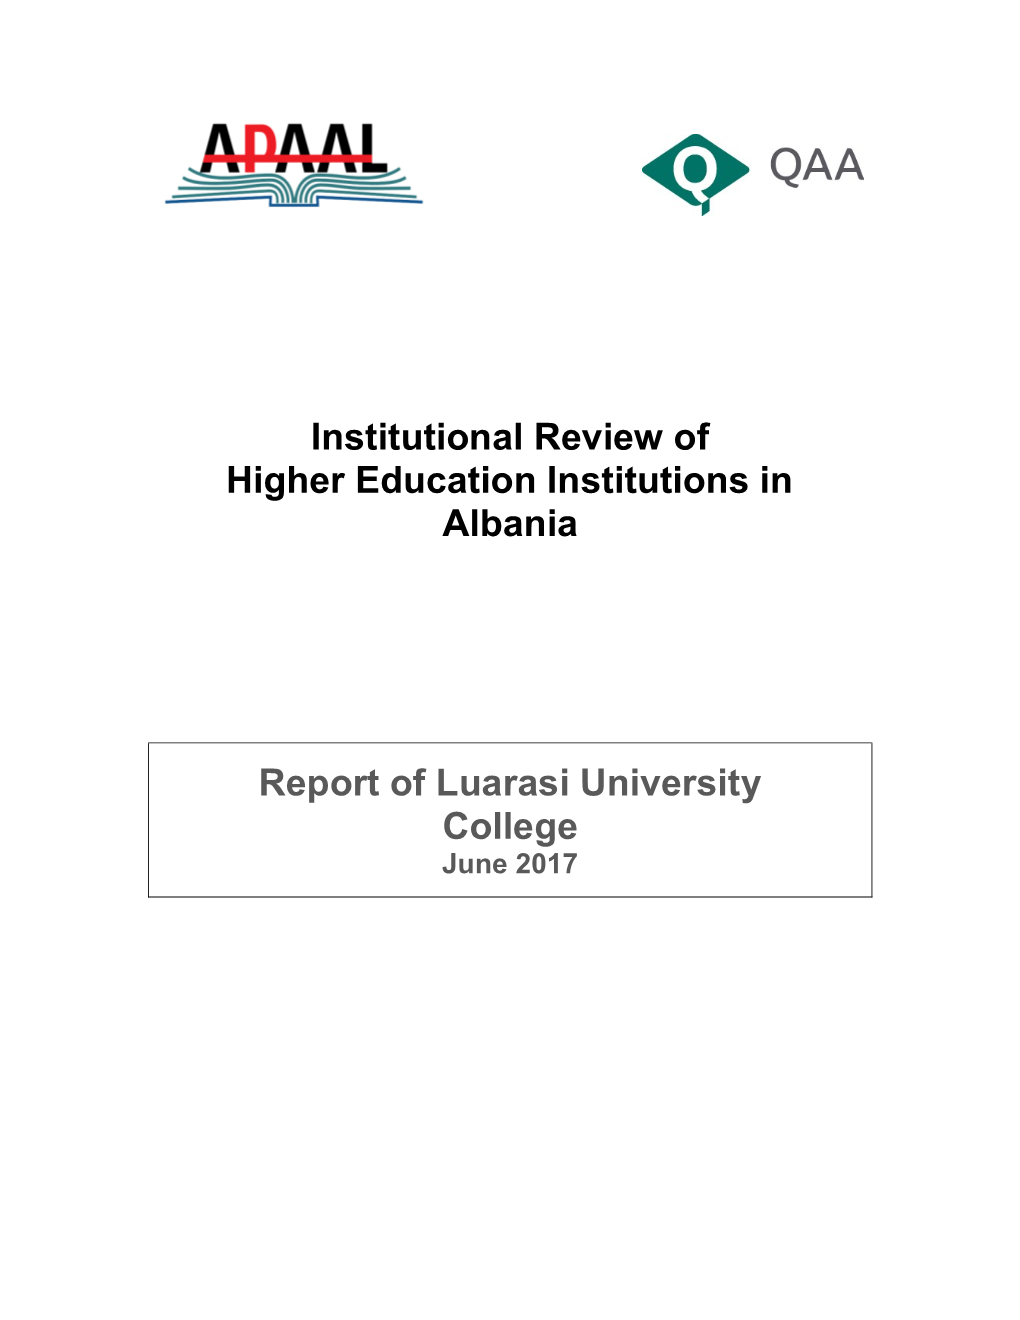 Institutional Review of Higher Education Institutions in Albania Report of Luarasi University College